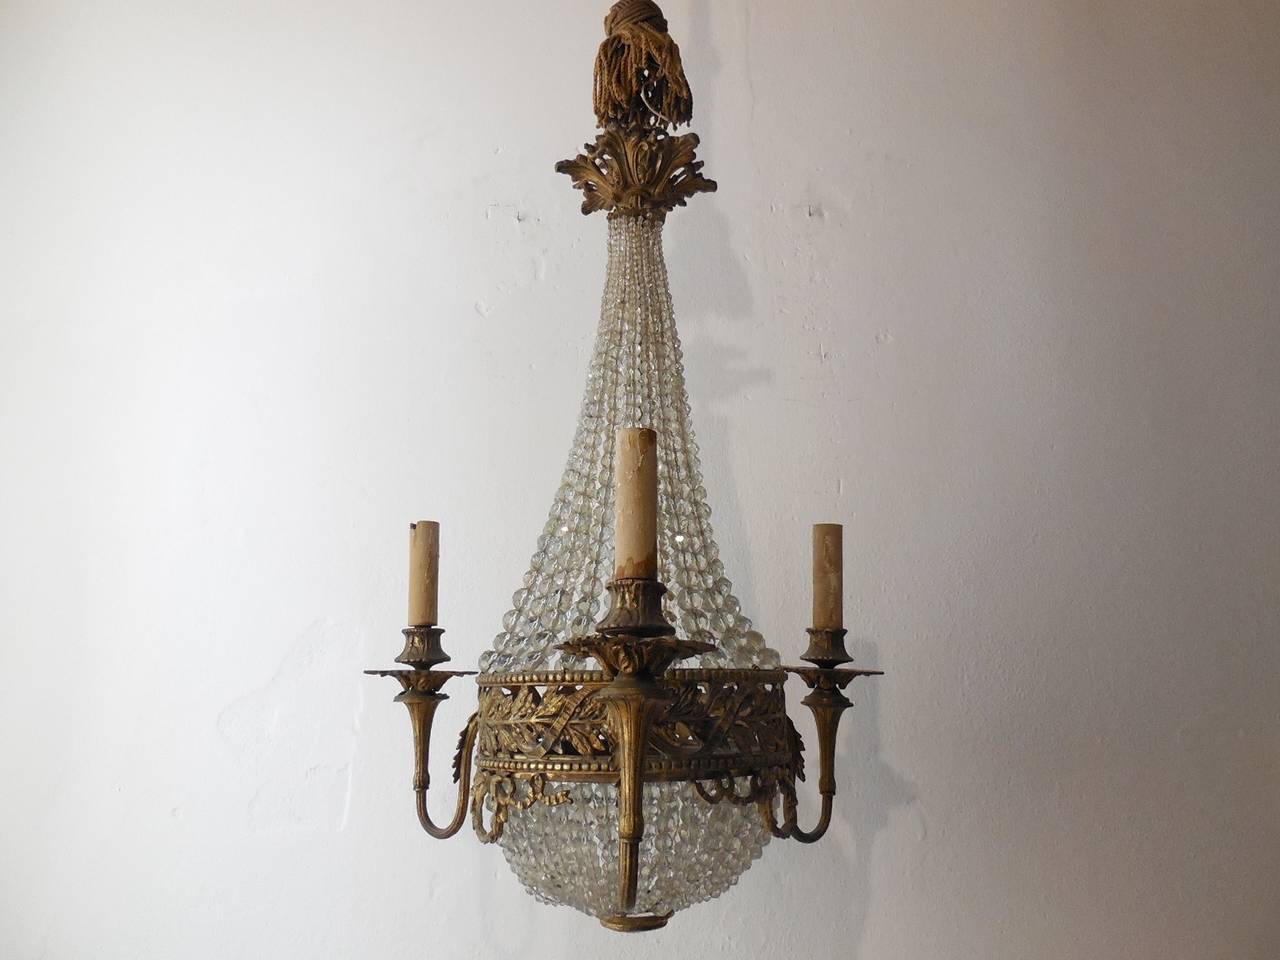 Housing 4 lights, 3 outside and one in center. Heavy detailed bronze with perfect patina. Rows and rows of crystal beads, all hand cut, going from big to small. Huge prism on bottom as finial. Adding an additional 24 inches of the original stiff